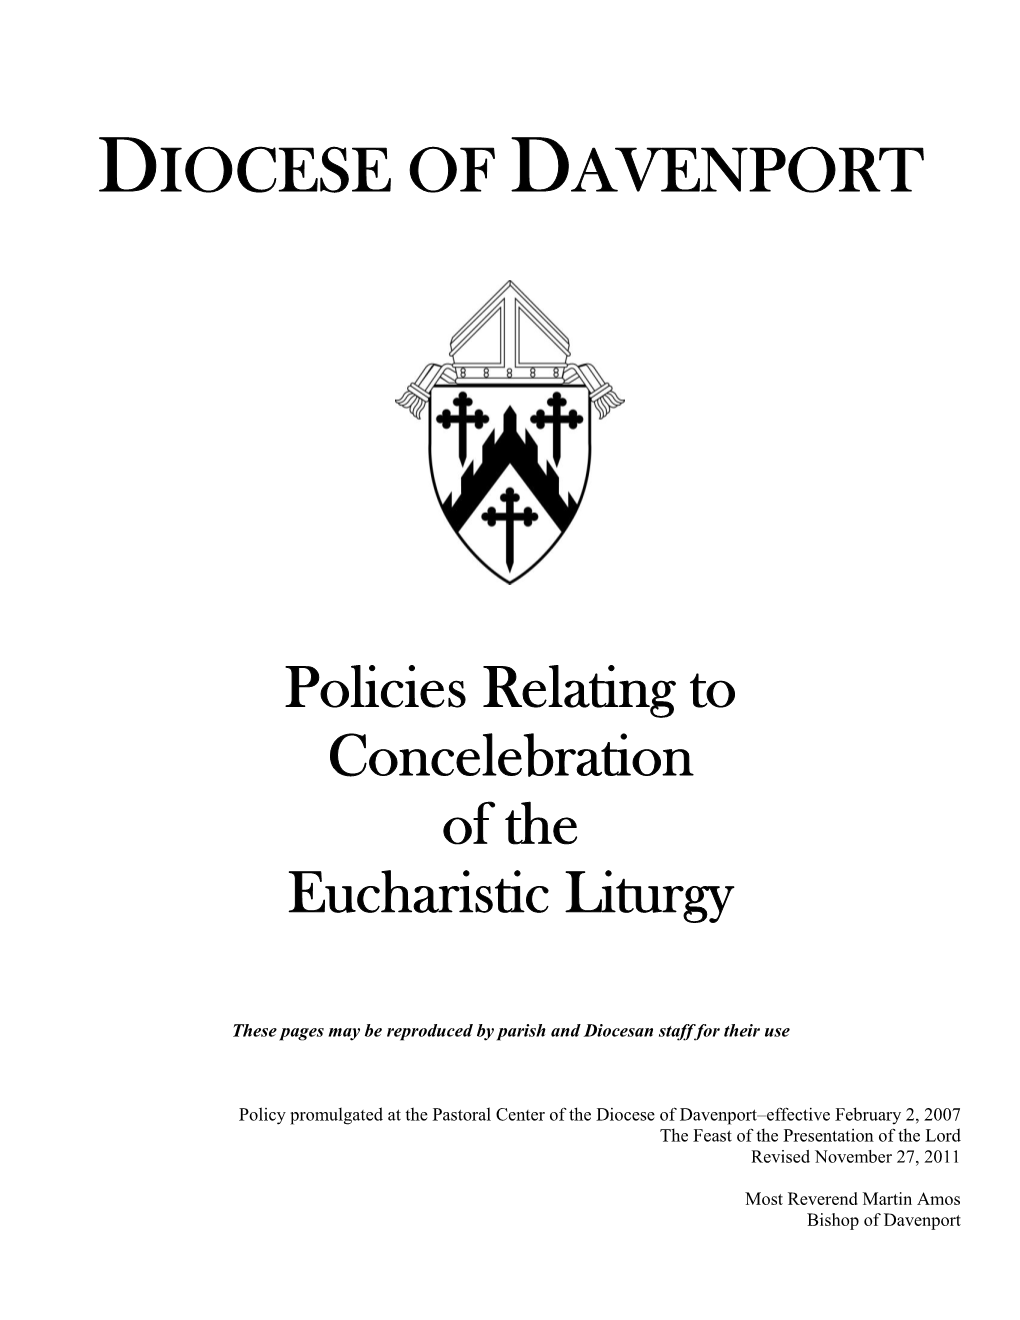 Policies Relating to Concelebration of the Eucharistic Liturgy